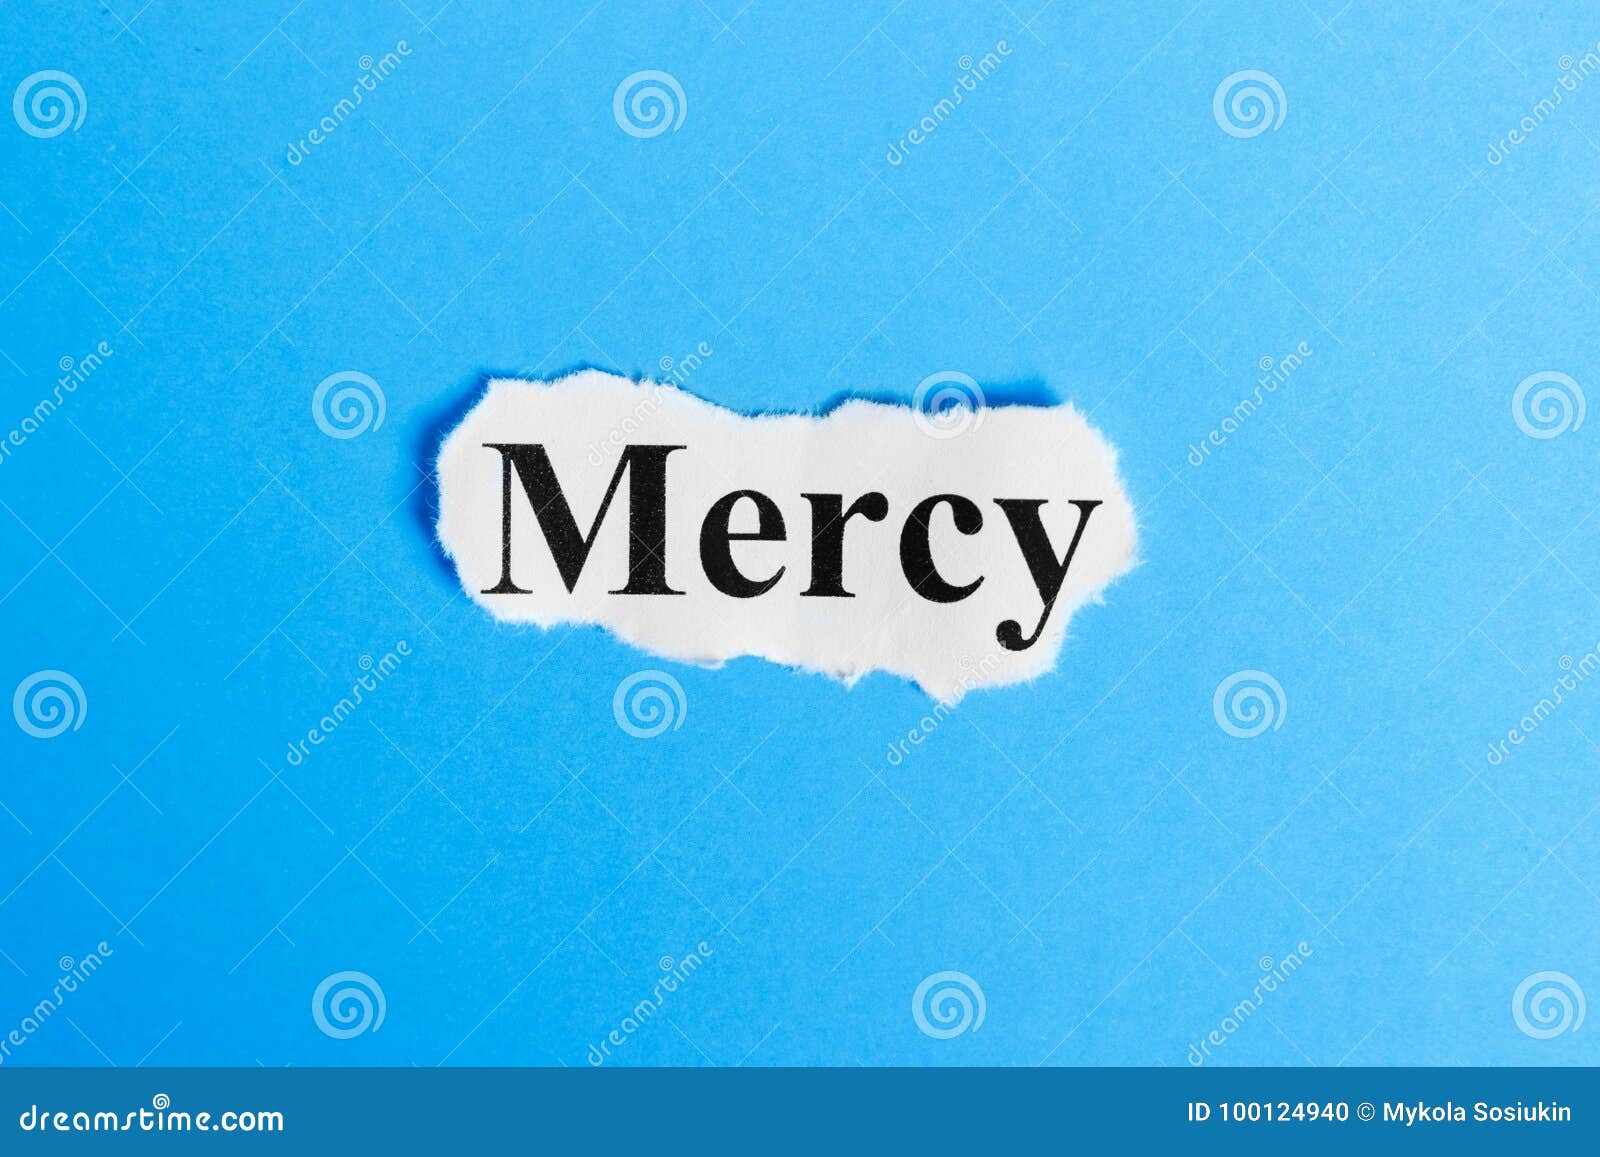 mercy text on paper. word mercy on a piece of paper. concept image